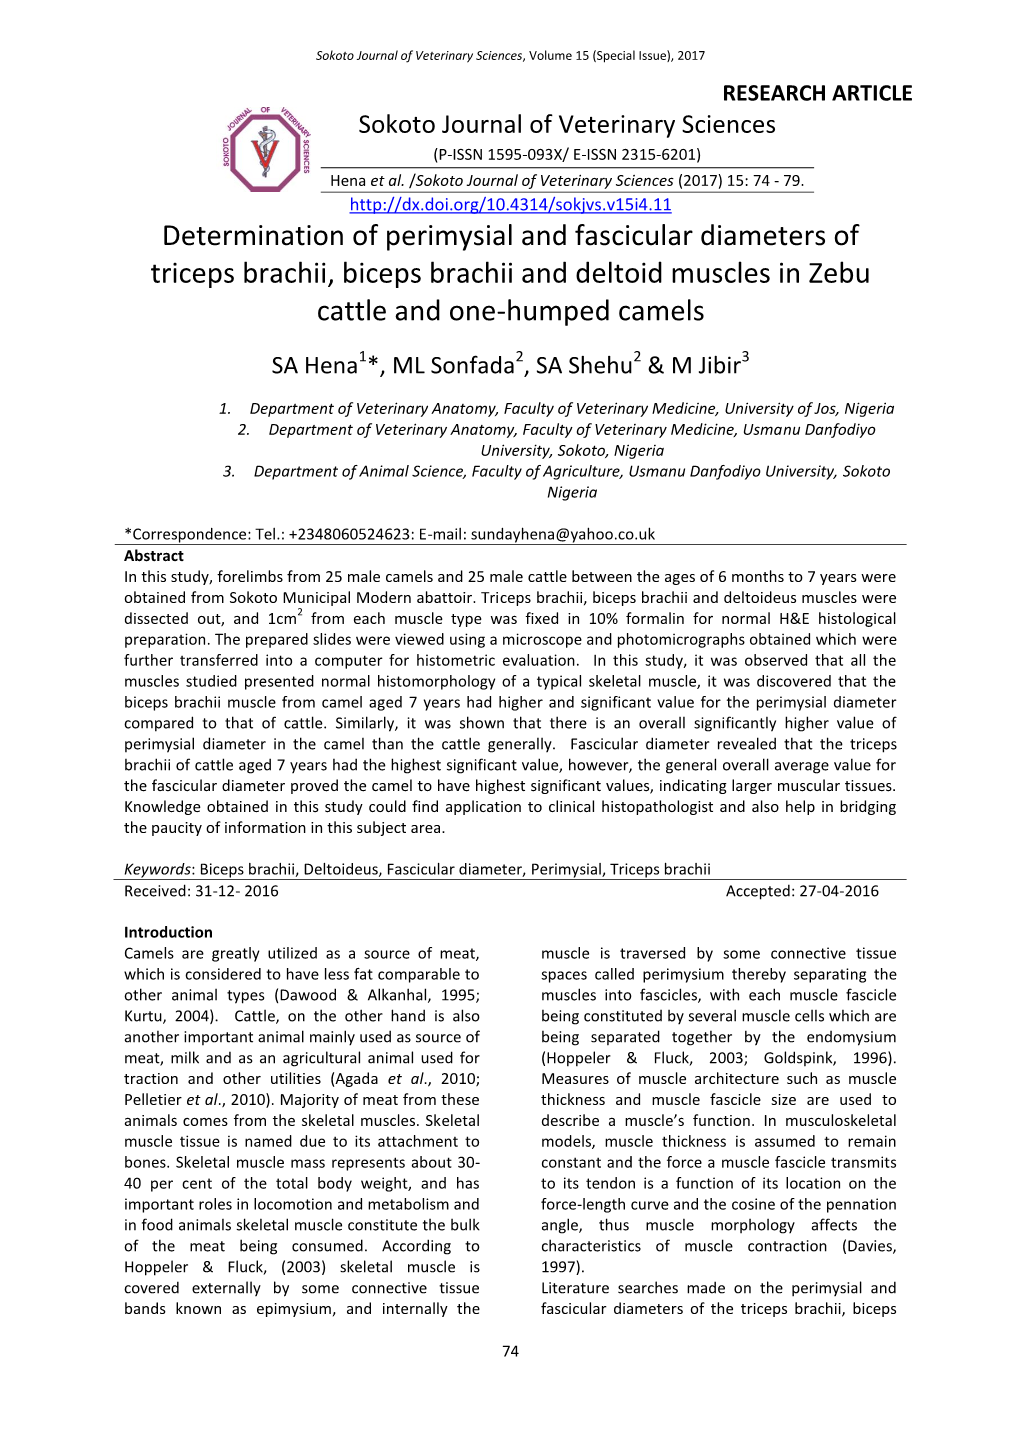 Determination of Perimysial and Fascicular Diameters of Triceps Brachii, Biceps Brachii and Deltoid Muscles in Zebu Cattle and One-Humped Camels